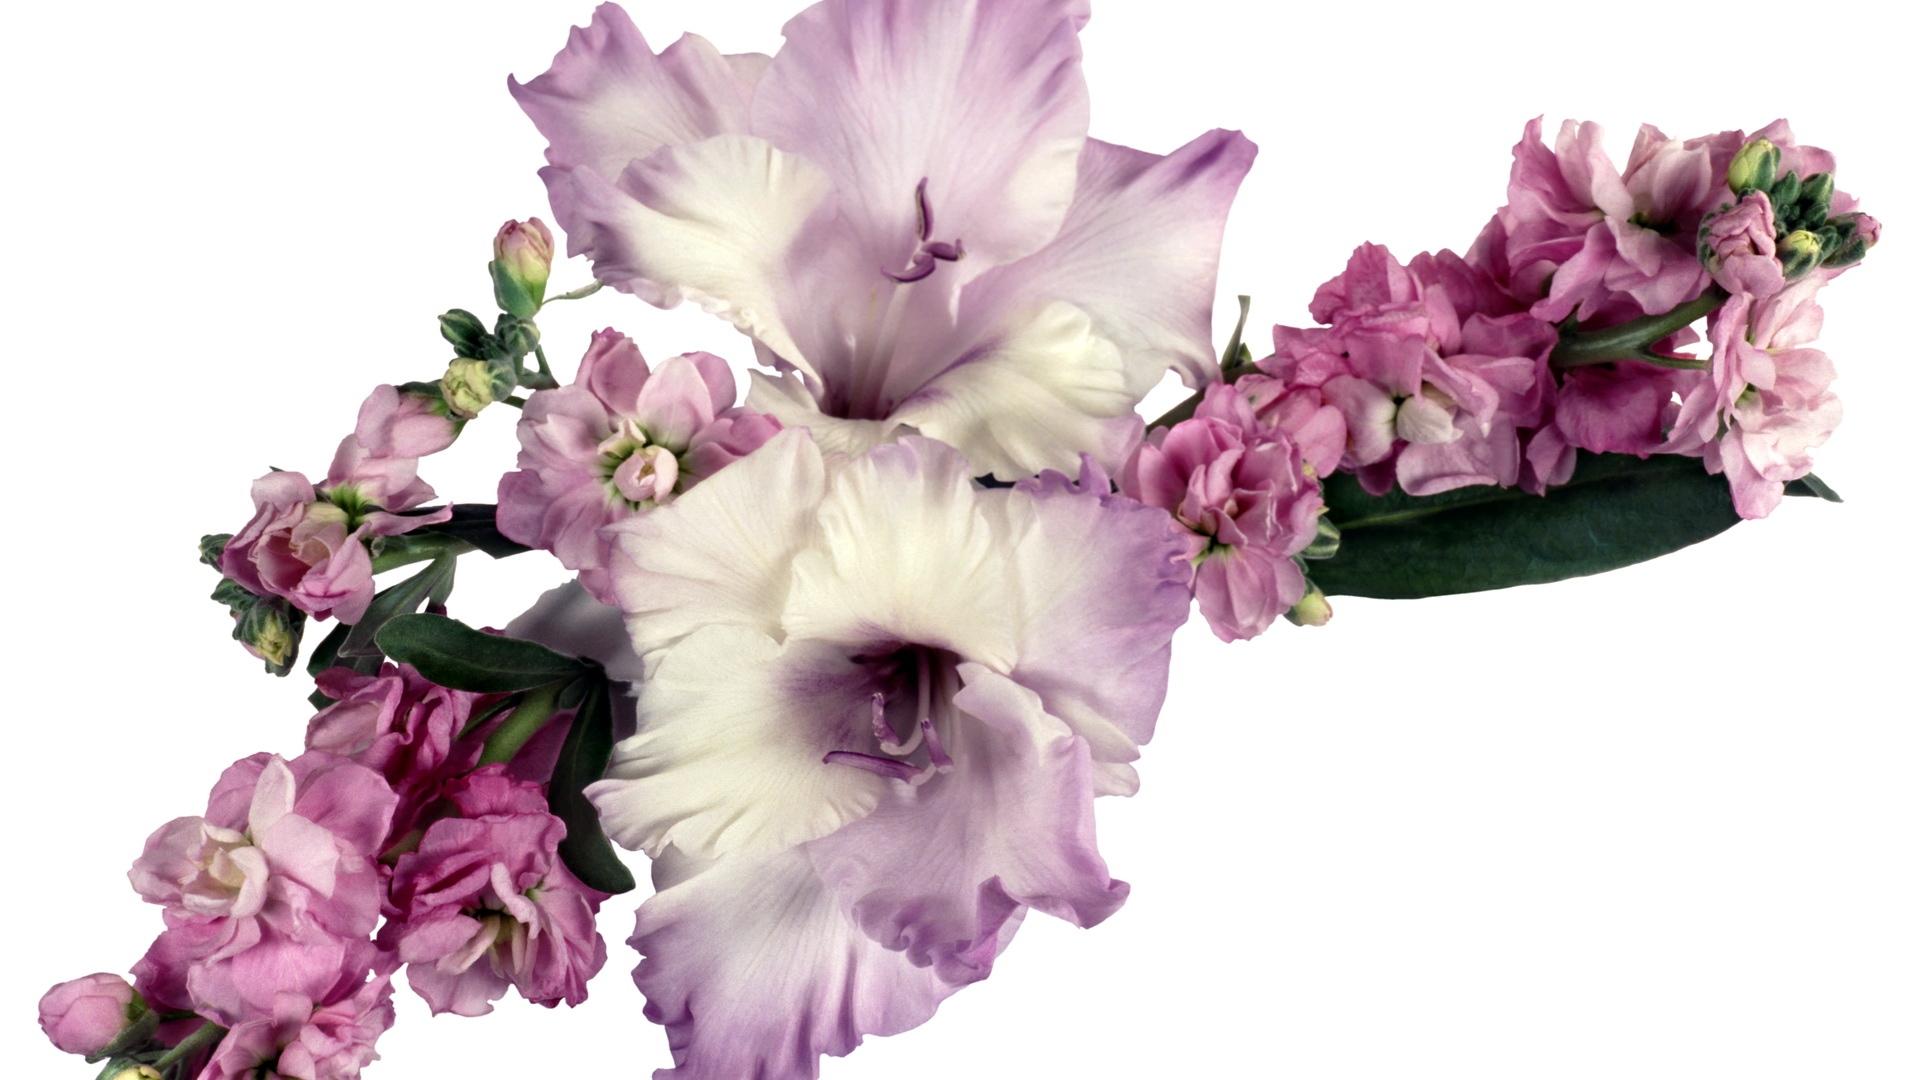 Download wallpaper 1920x1080 gladiolus, flowers, leaves, song full